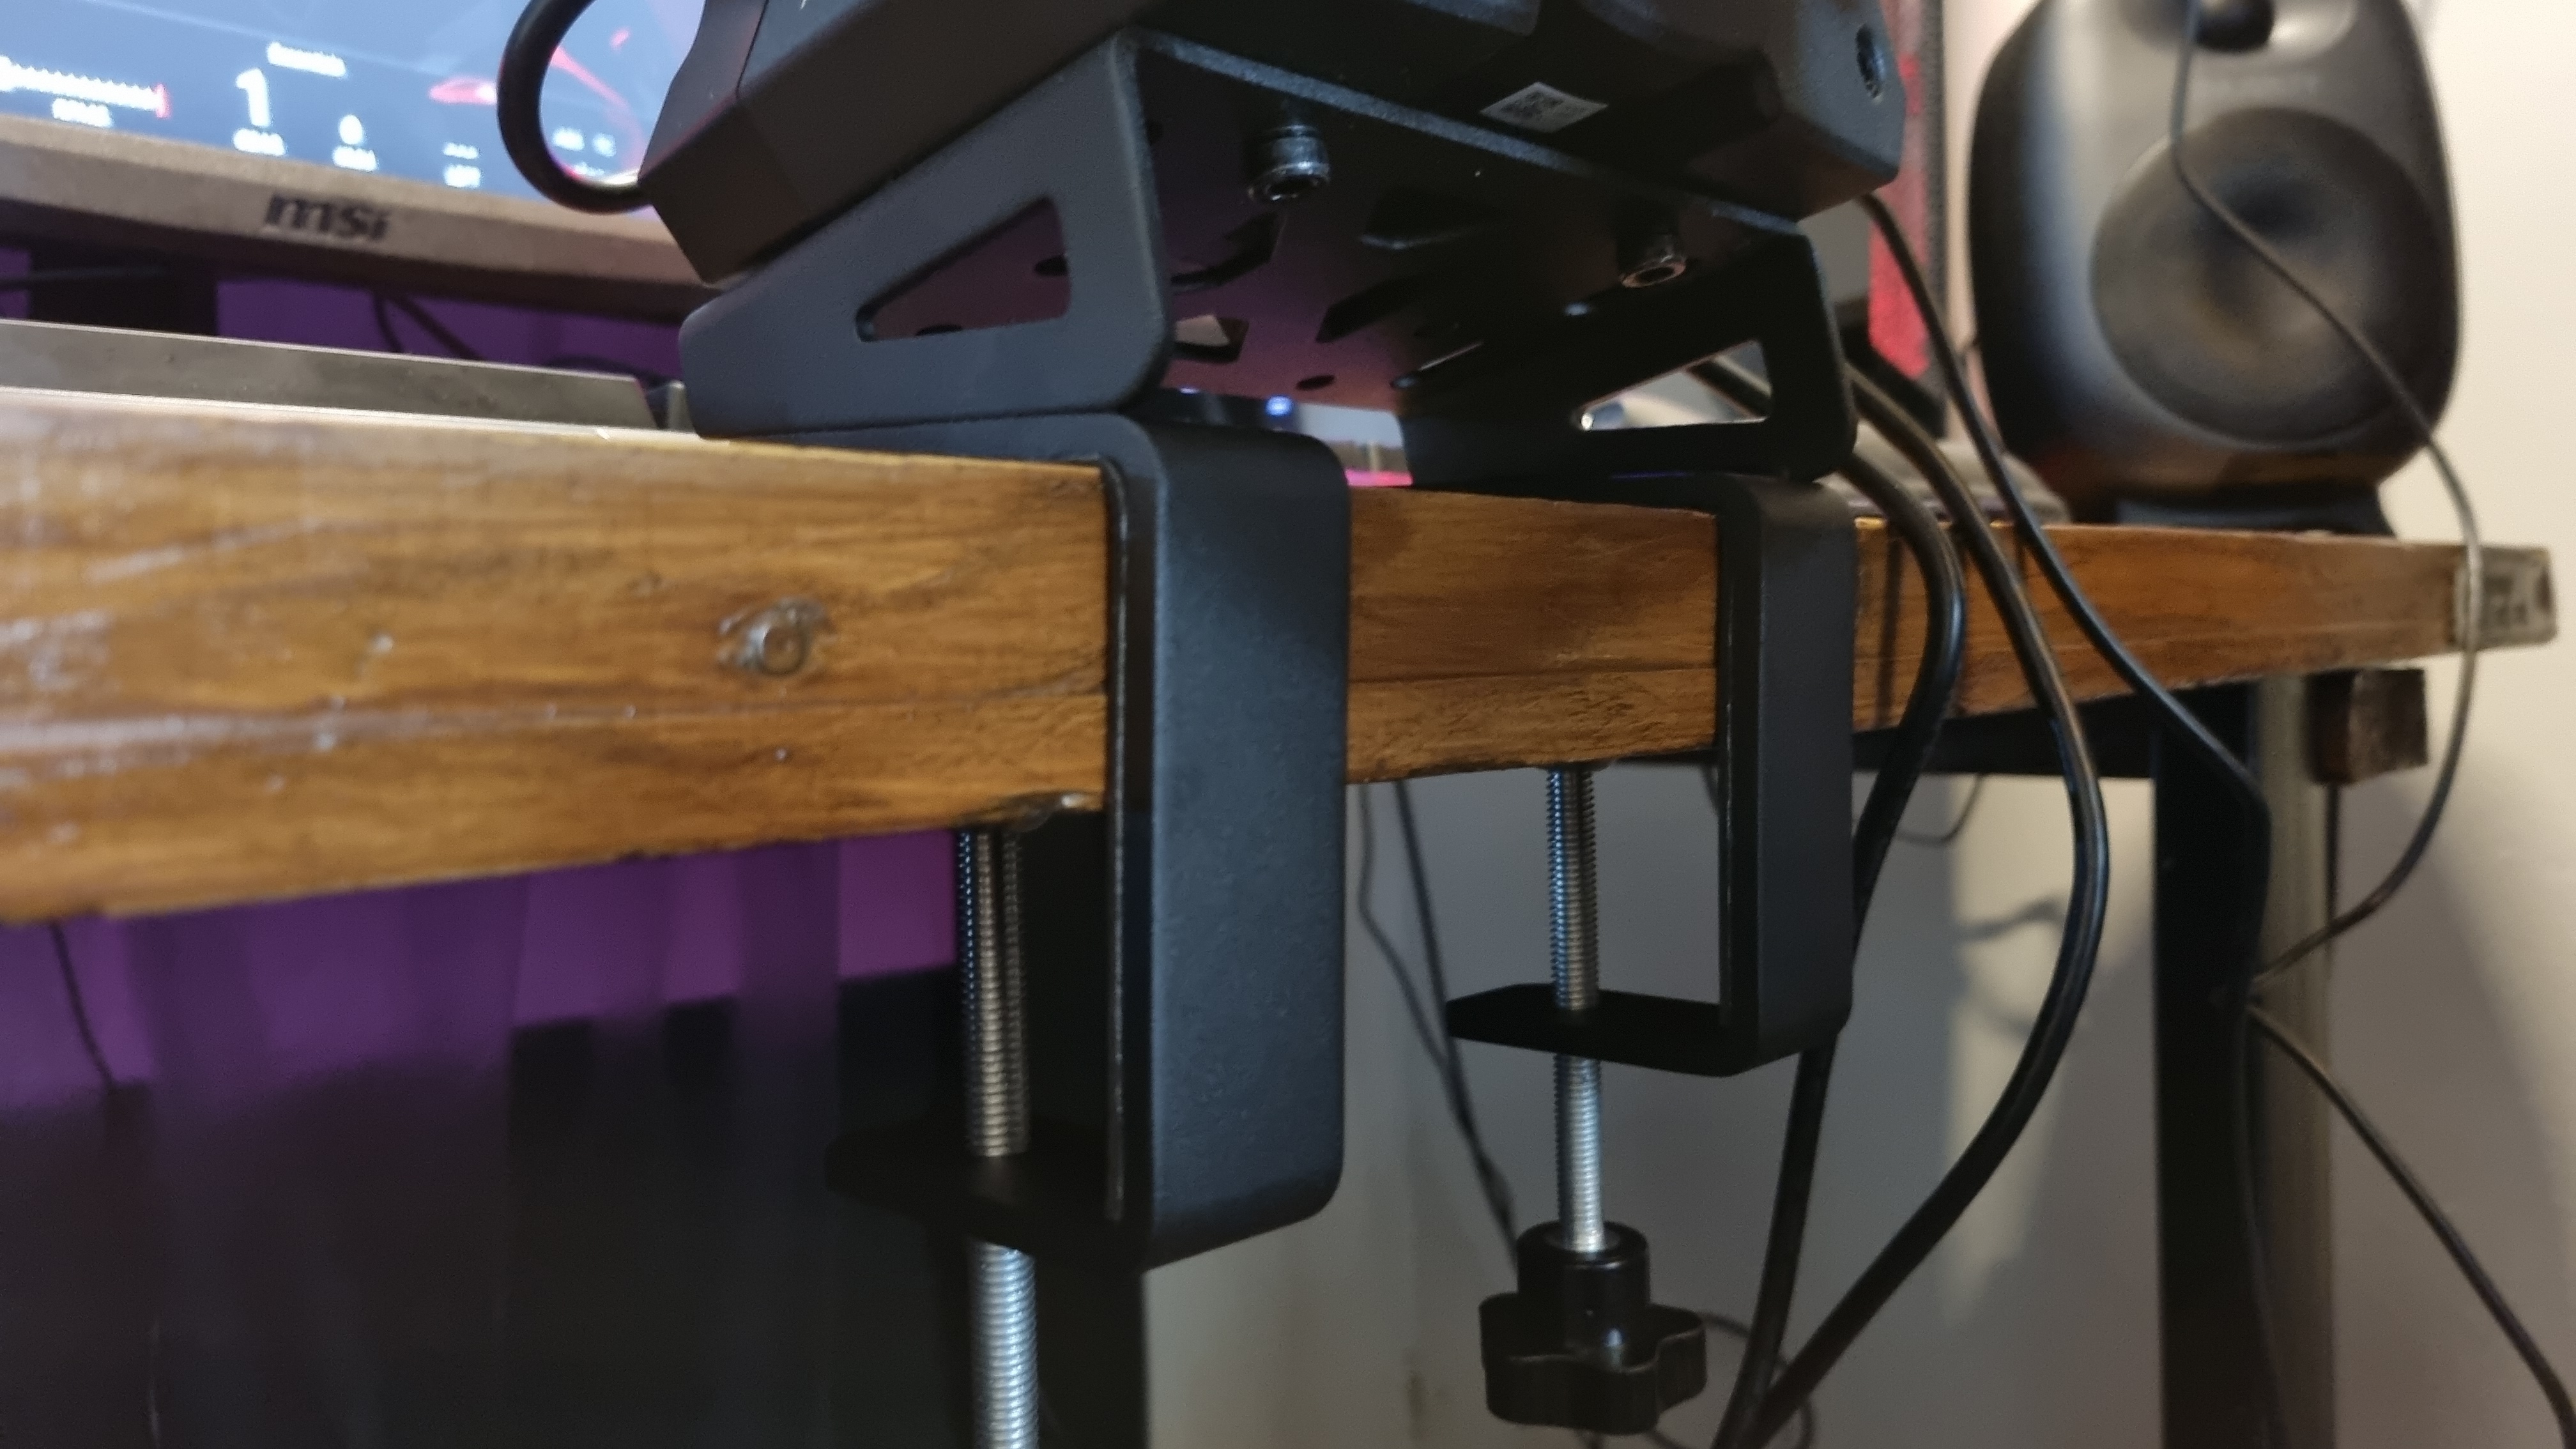 The MOZA R5 desk clamp, mounted to a wooden desk